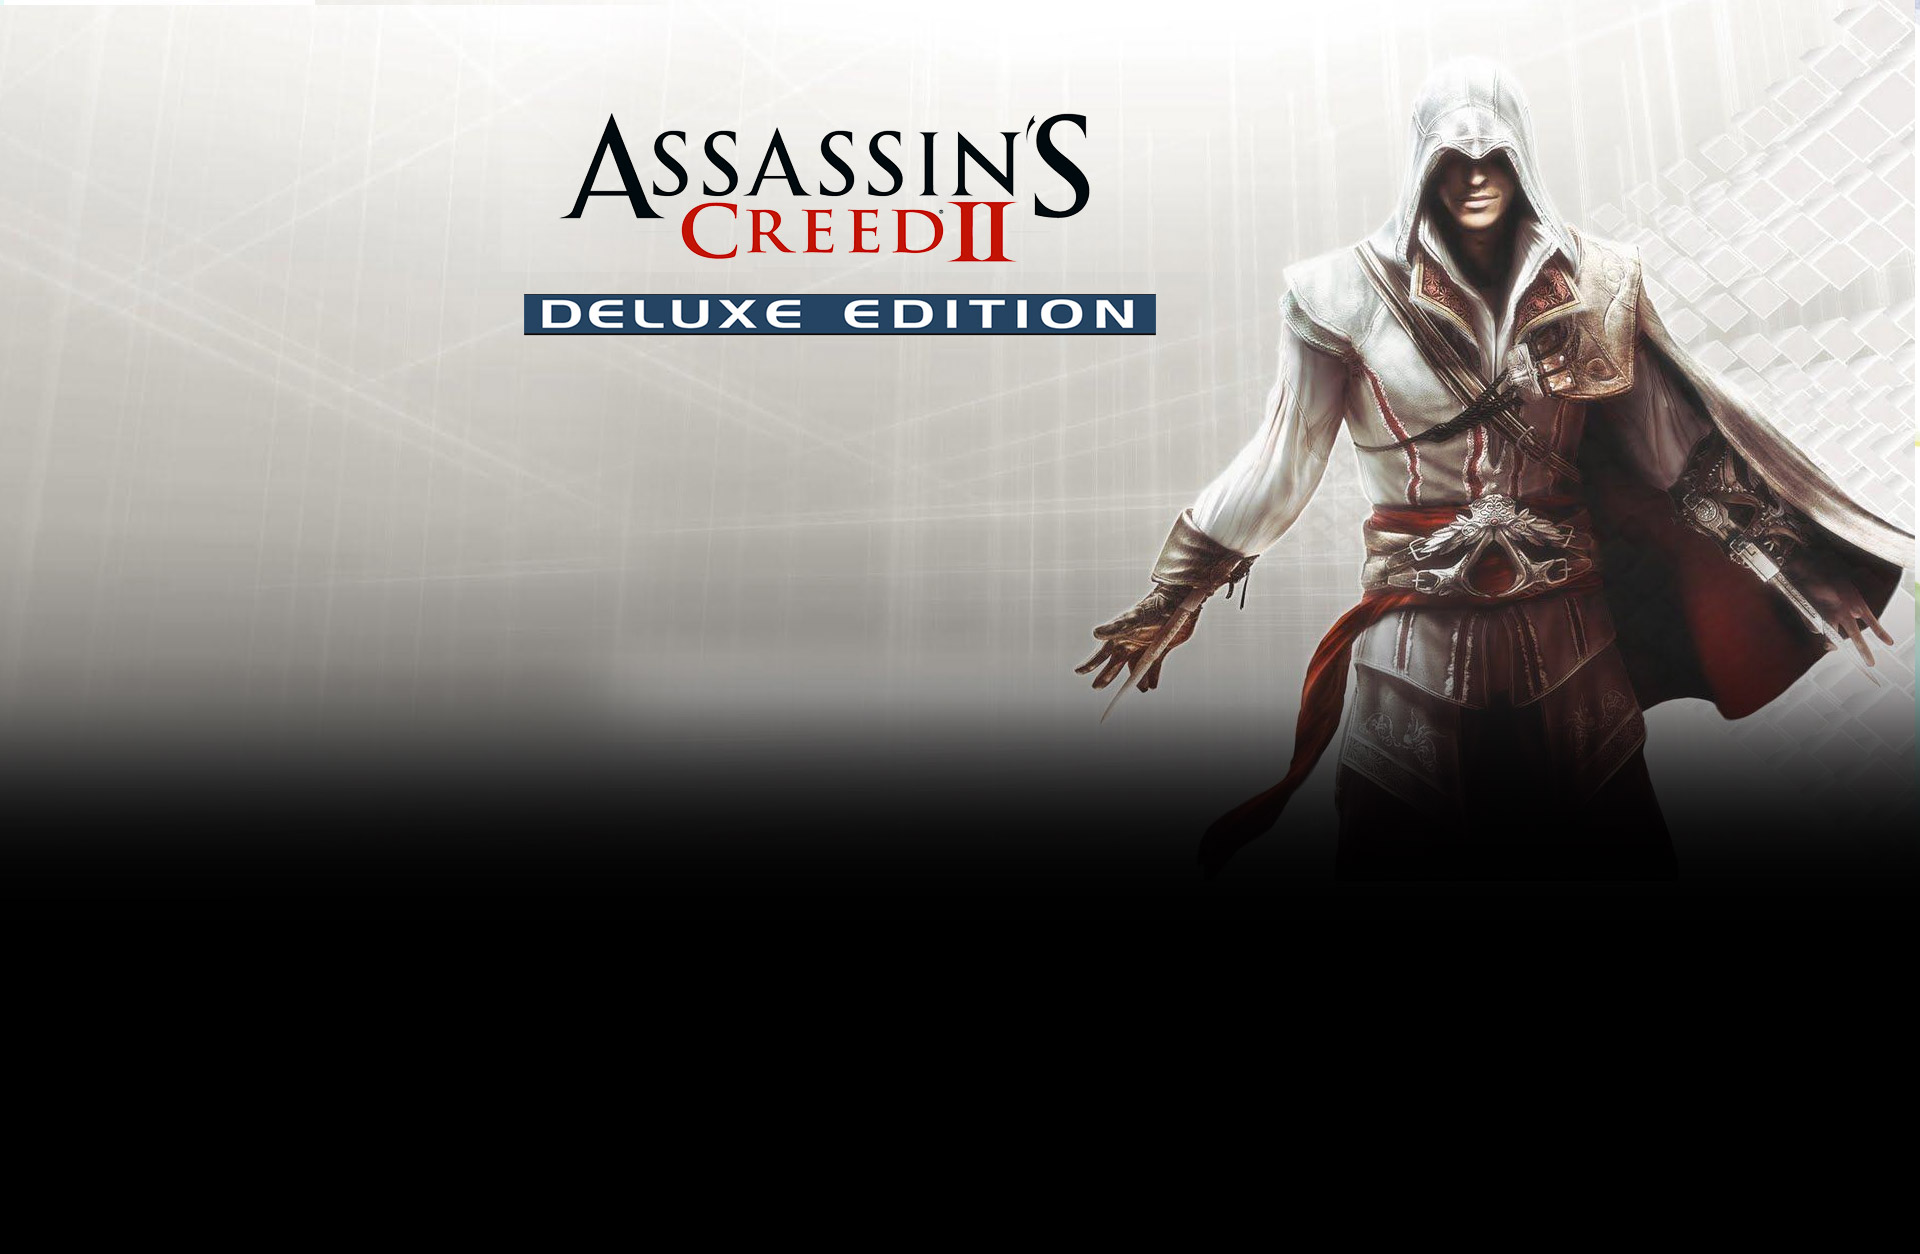 Assasin Screed 2 Deluxe. Assassins Creed 2 Deluxe Edition. Королевский ассасин.